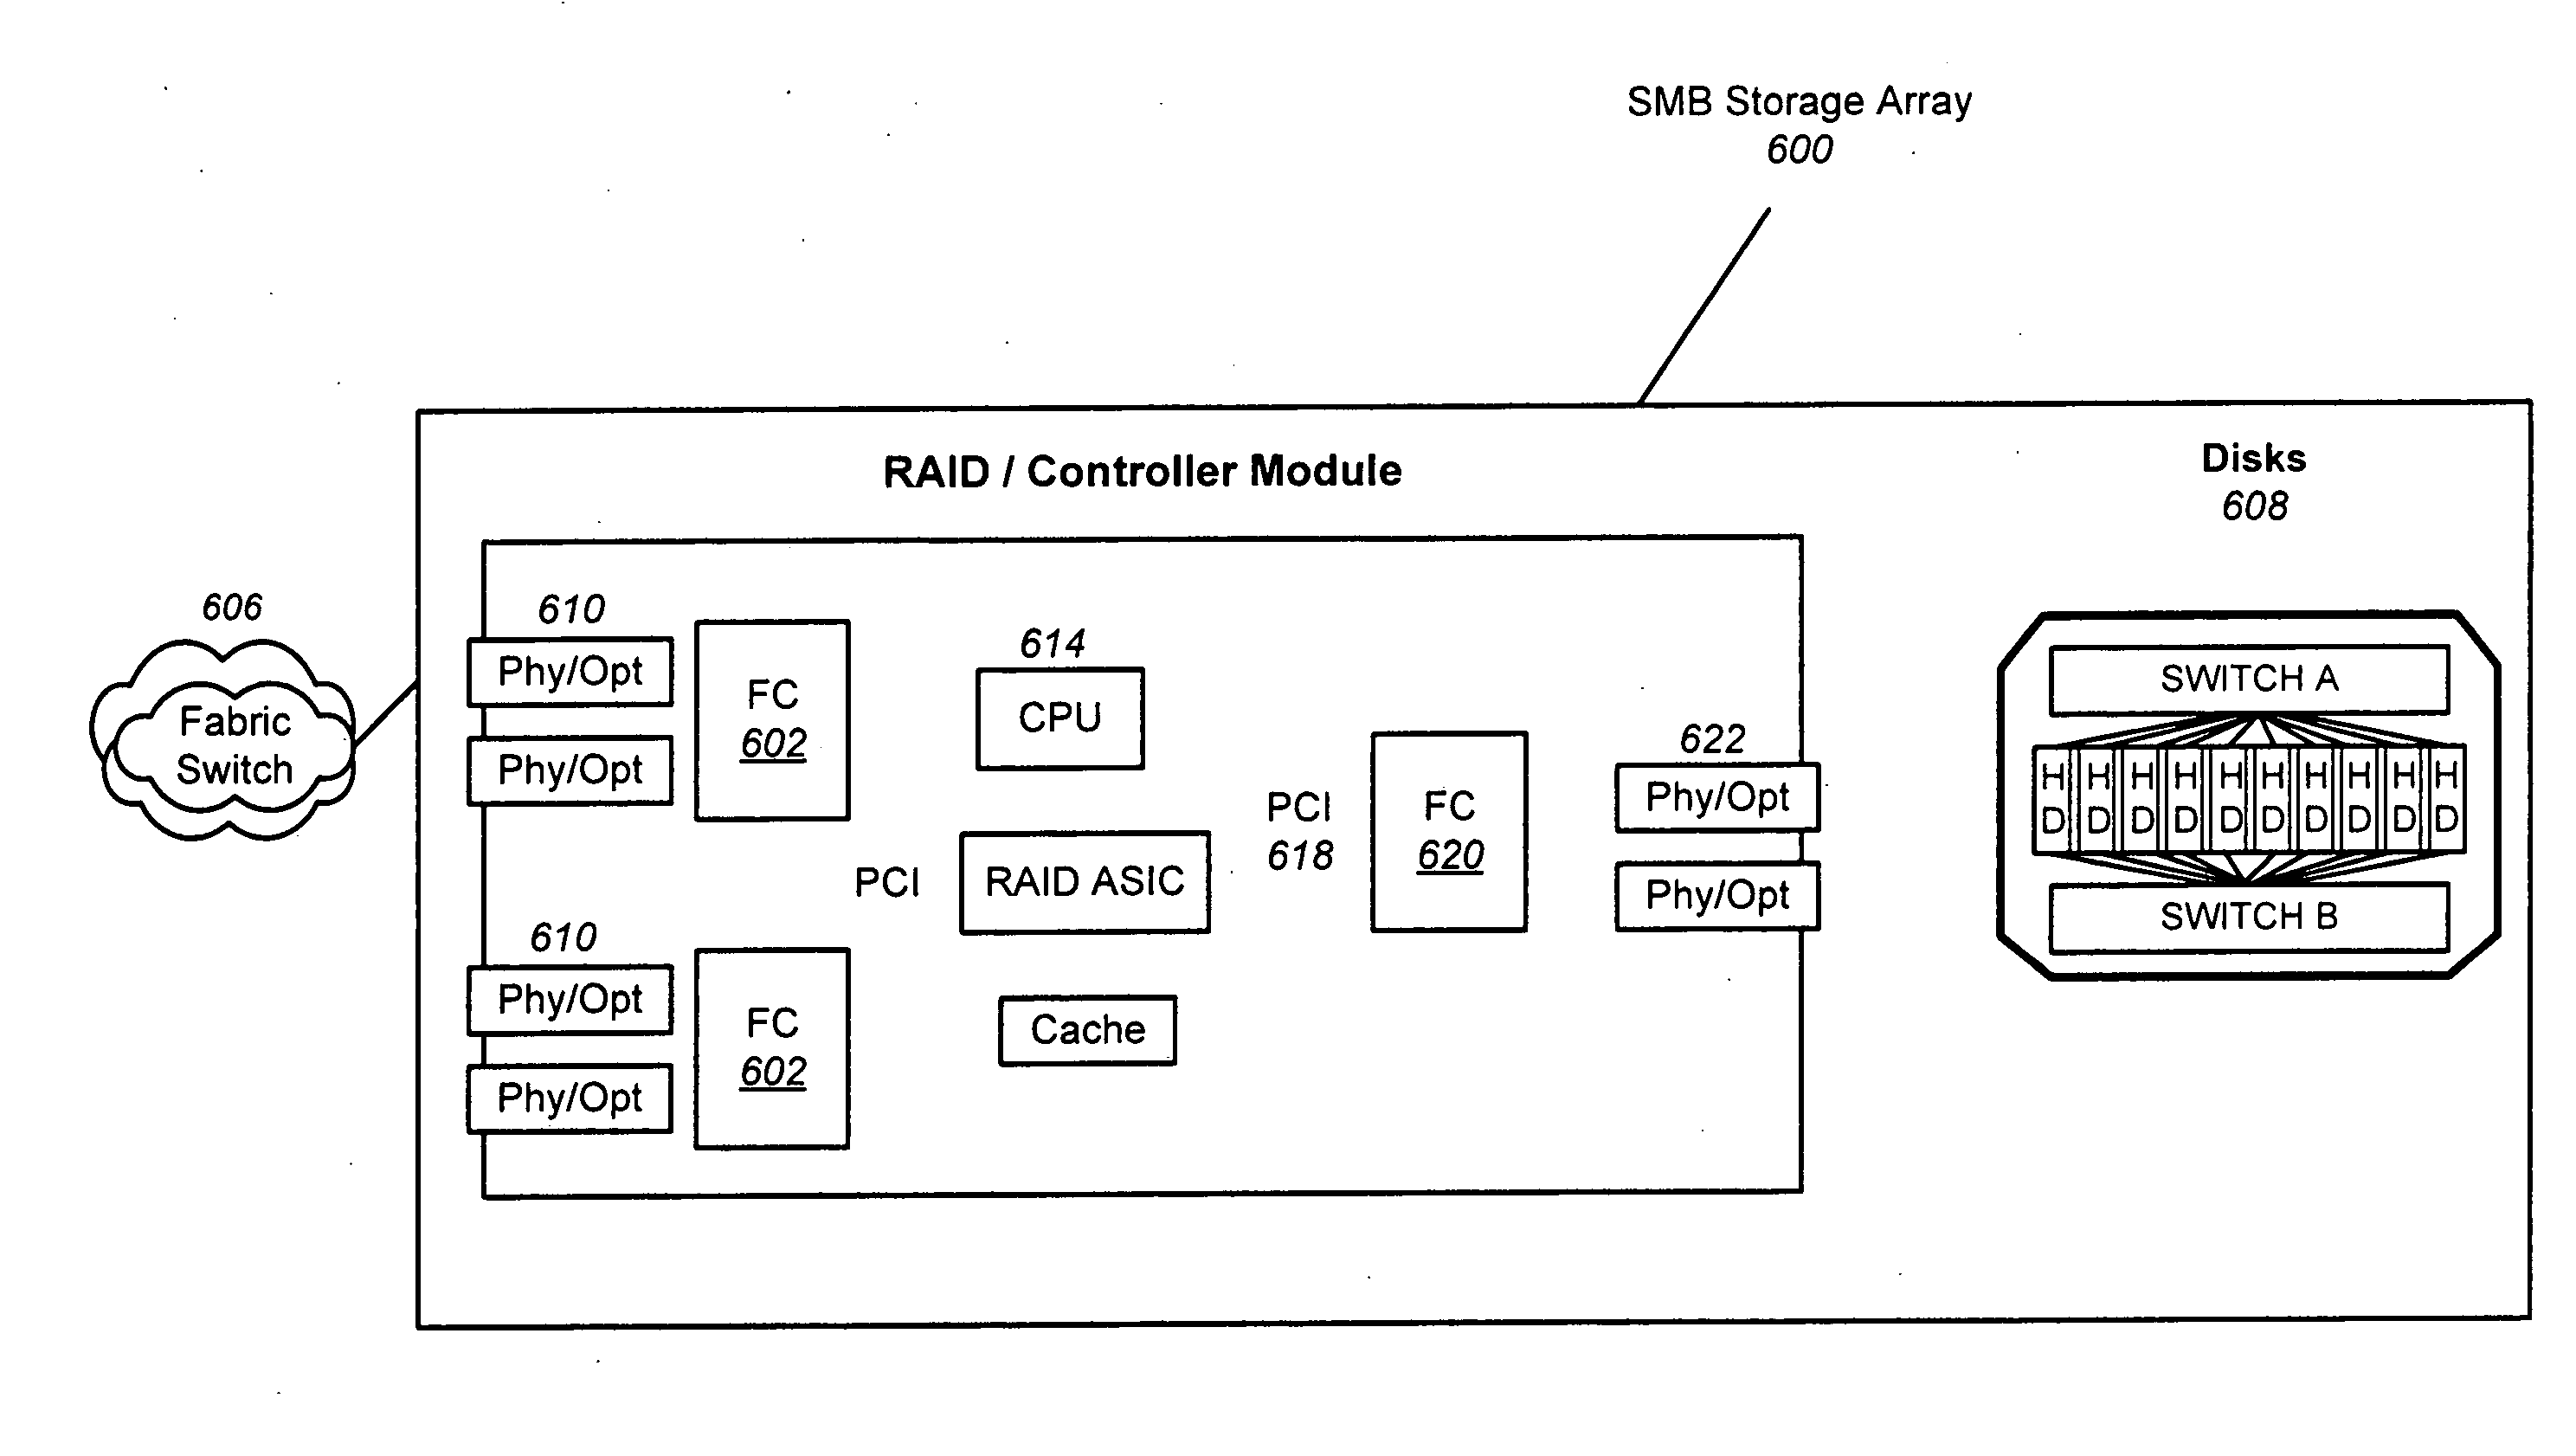 Multi-protocol controller that supports PCle, SAS and enhanced ethernet